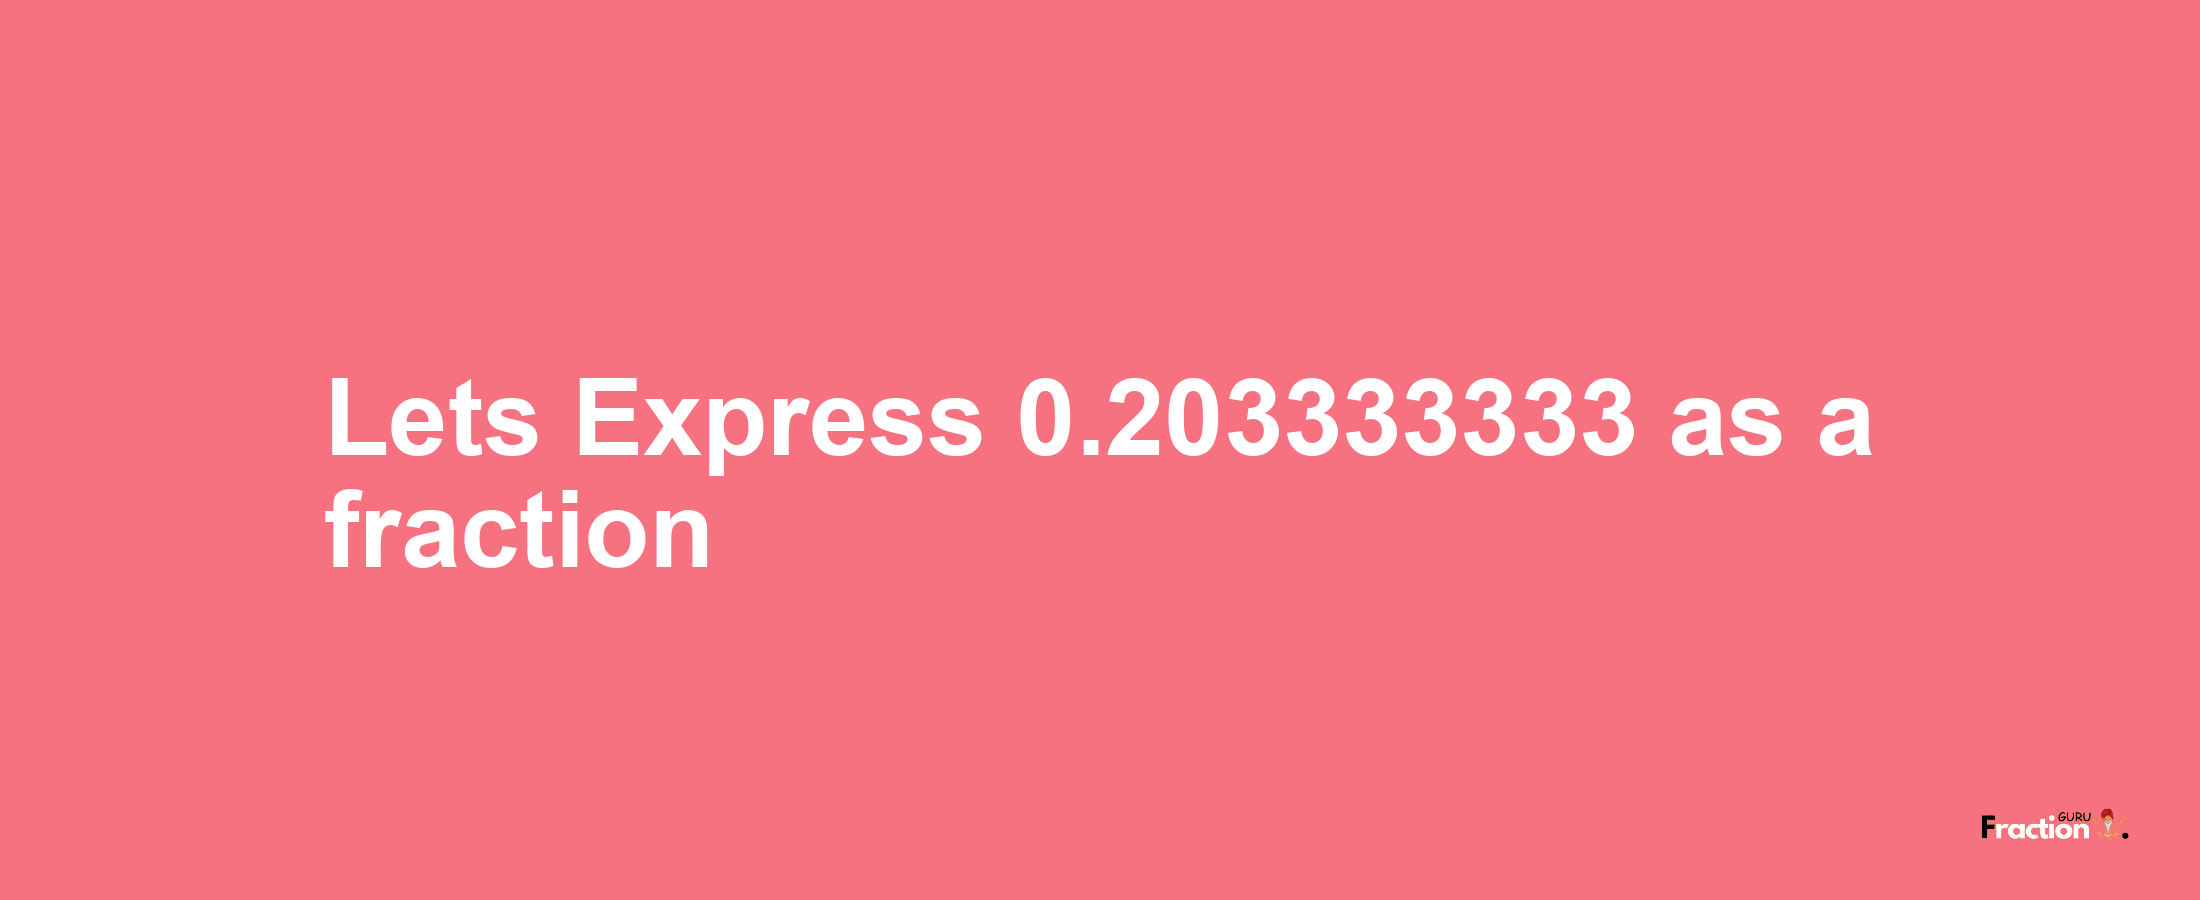 Lets Express 0.203333333 as afraction